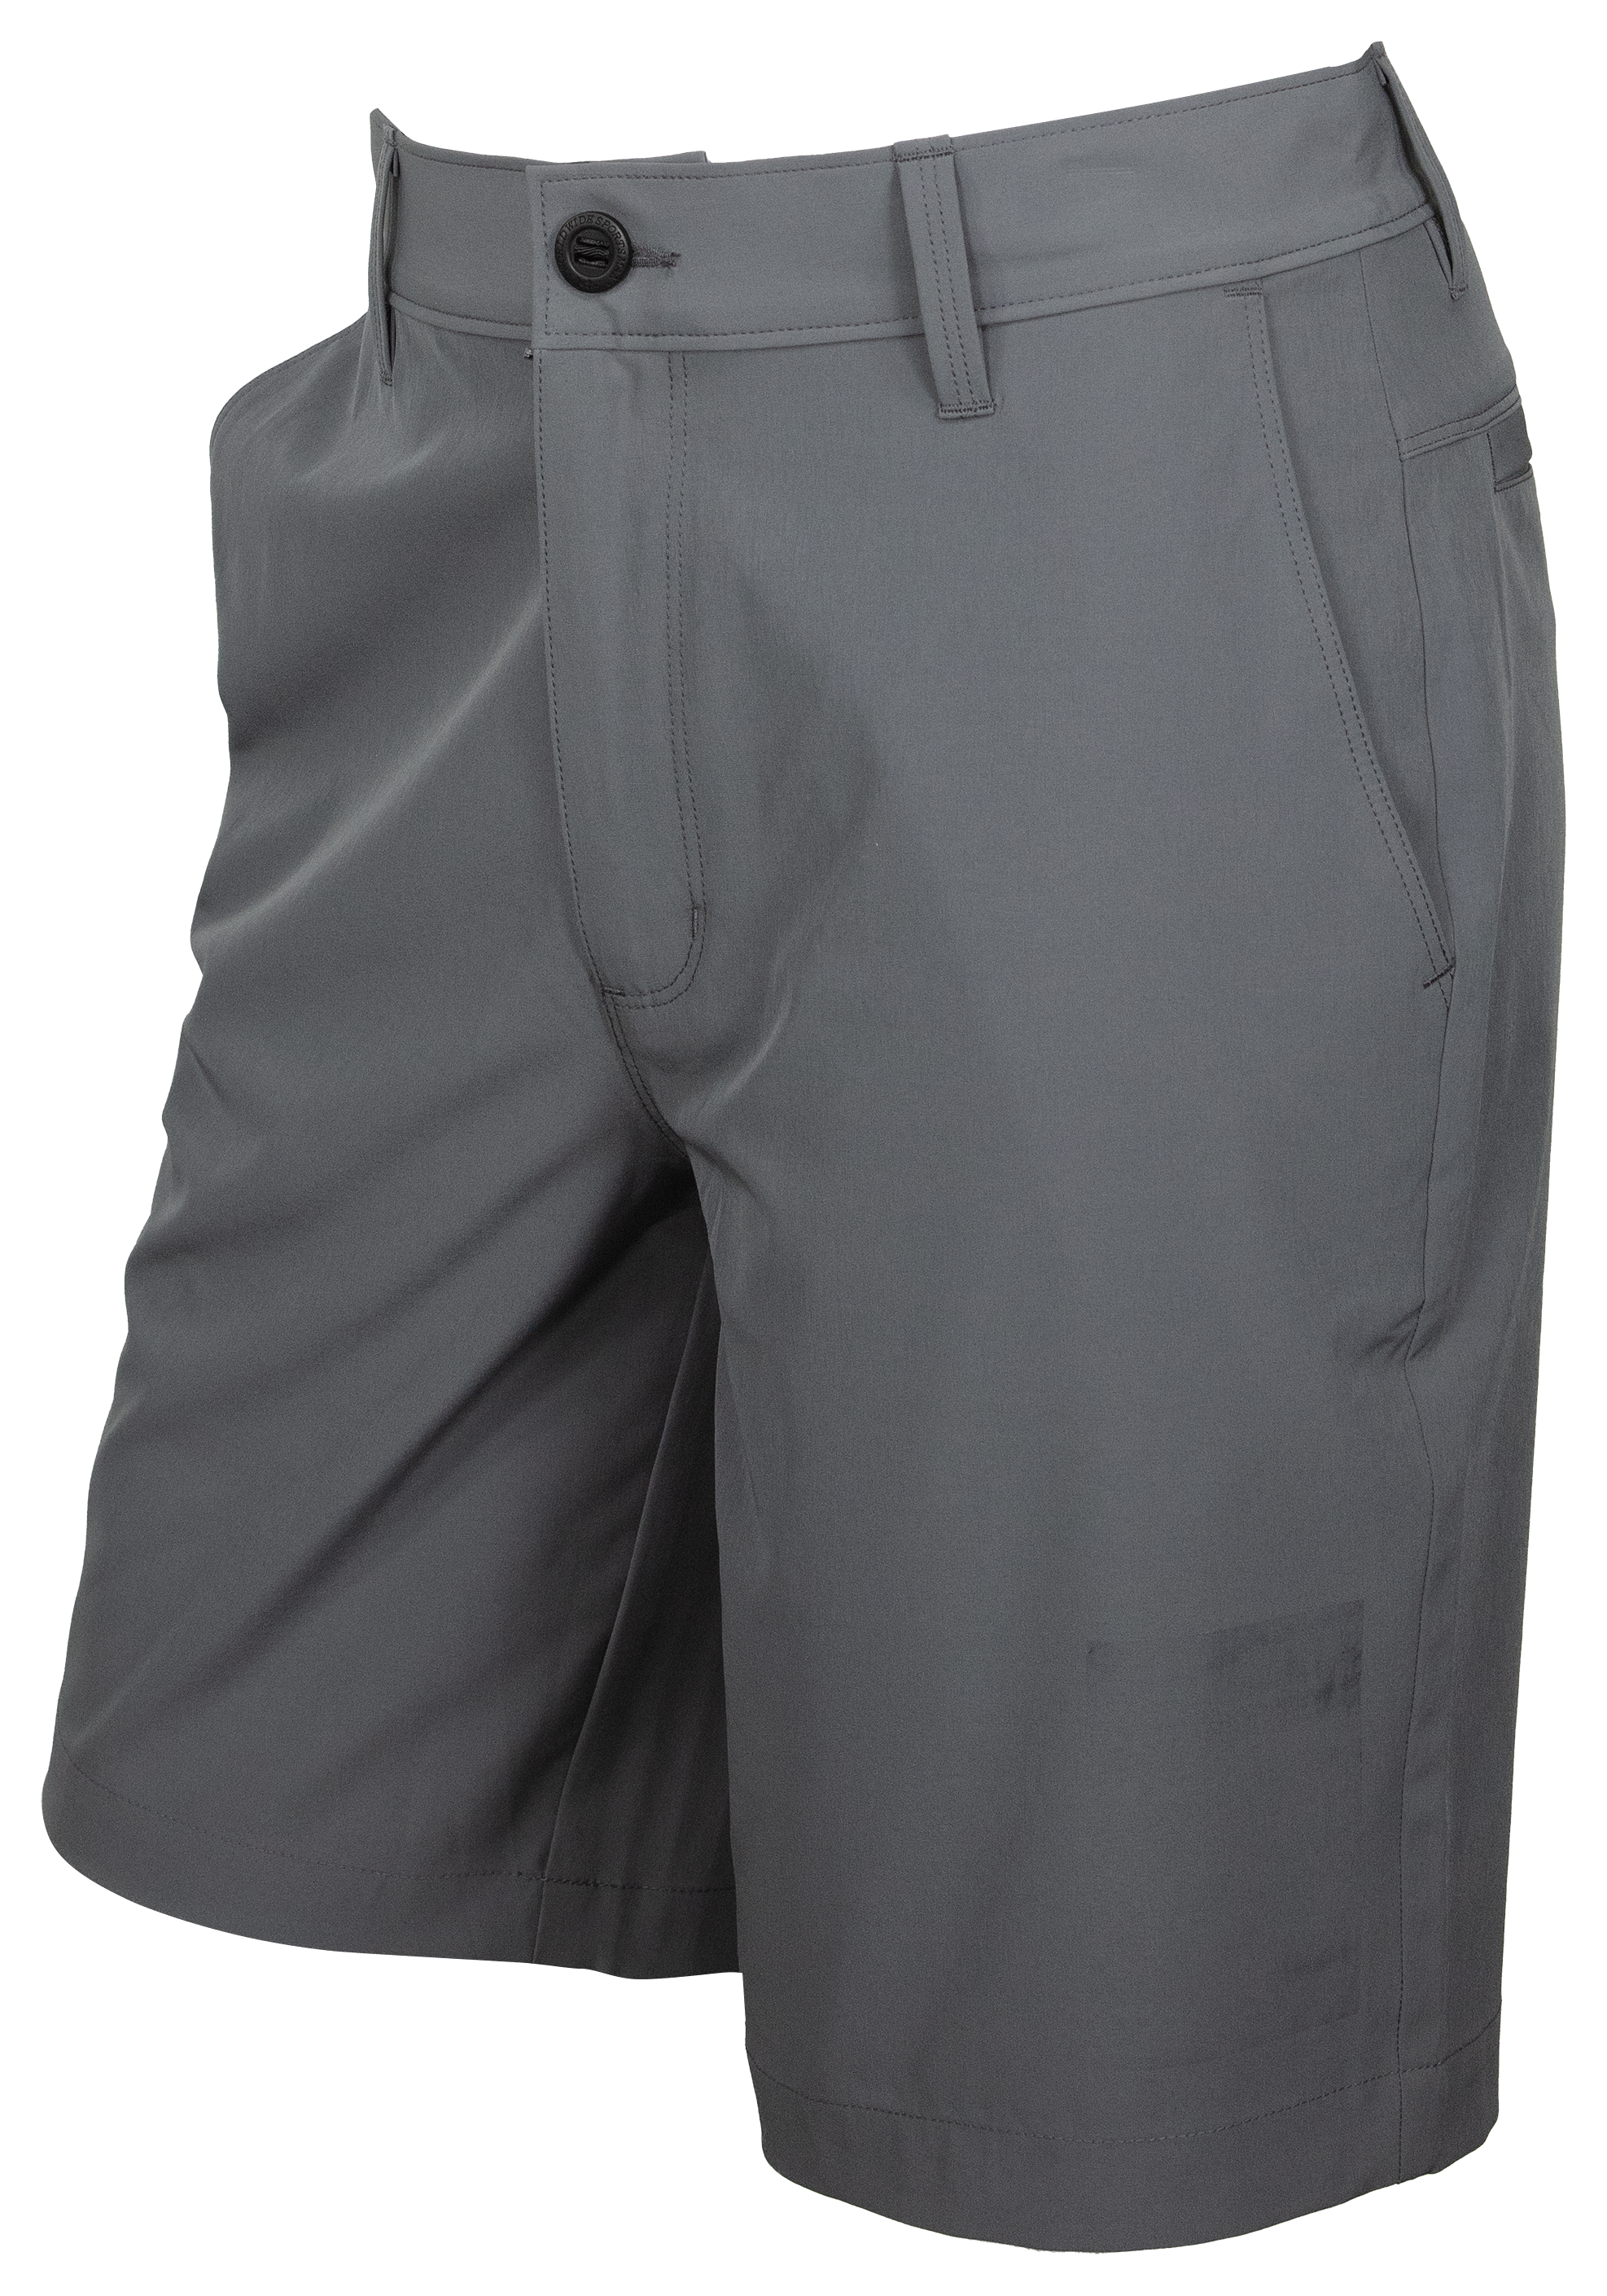 World Wide Sportsman Pescador Fishing Shorts for Men - Solid Quiet Shade - 42